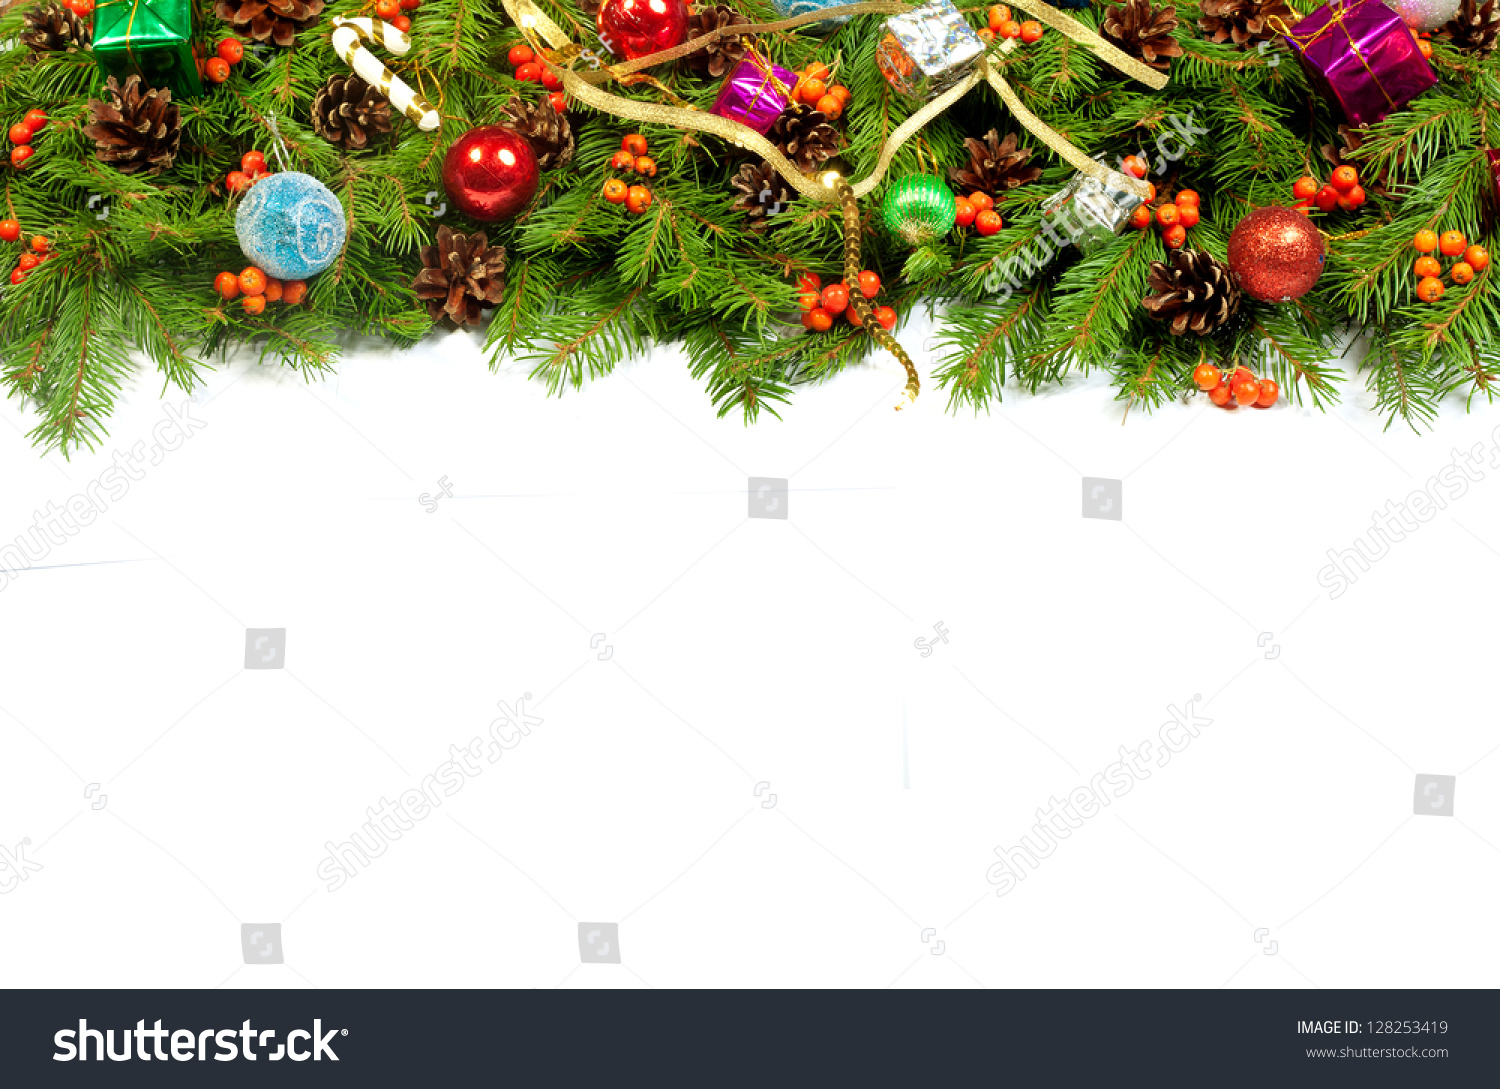 Christmas background with balls and decorations isolated on white background #128253419